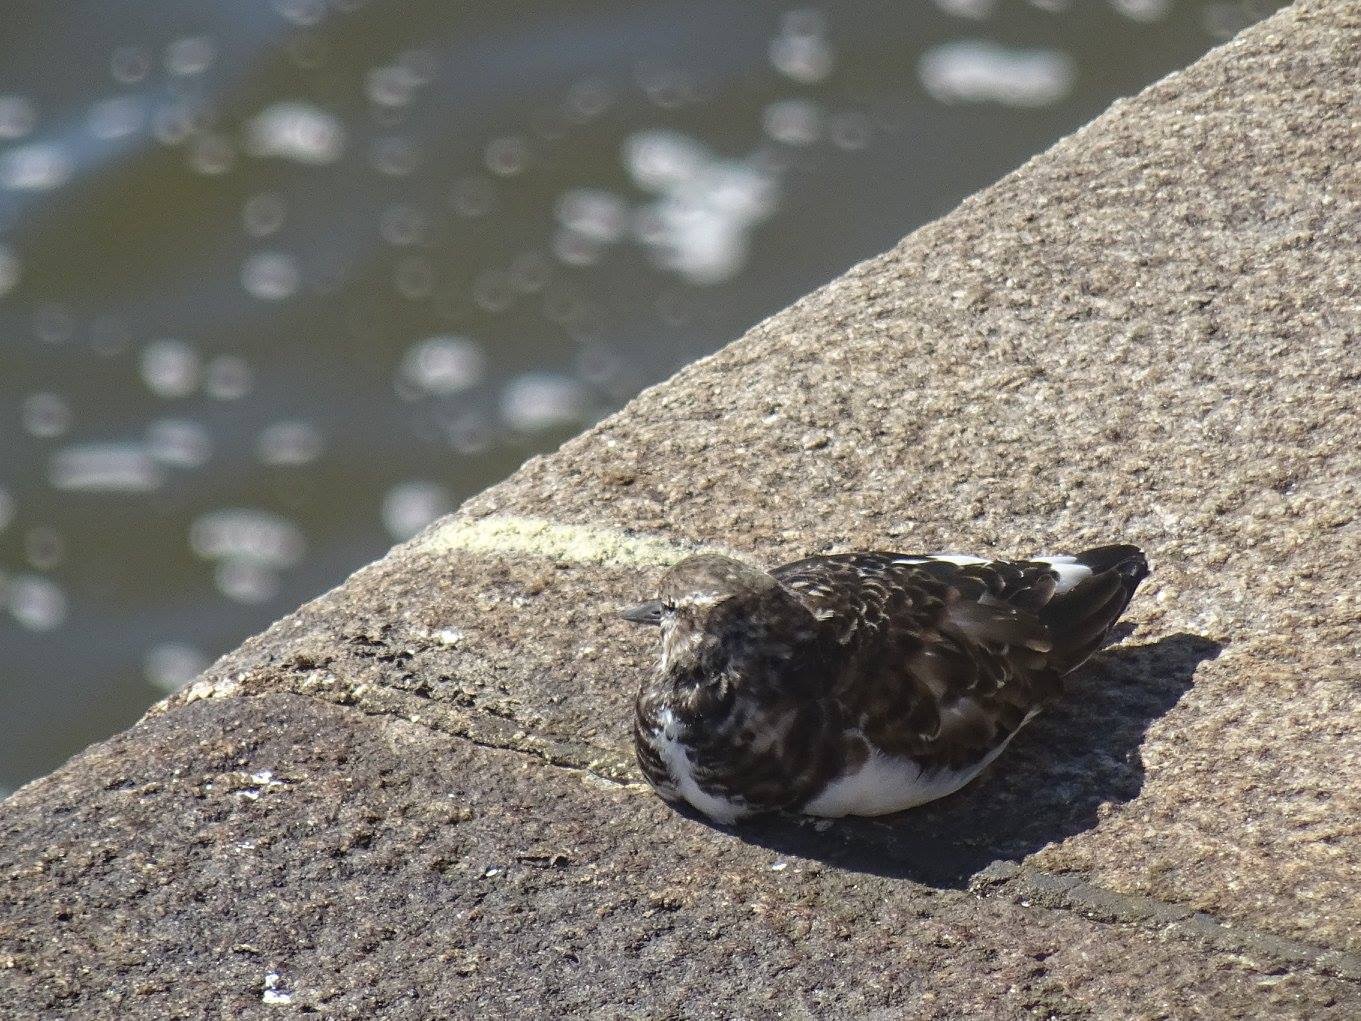 Turnstone by frances 